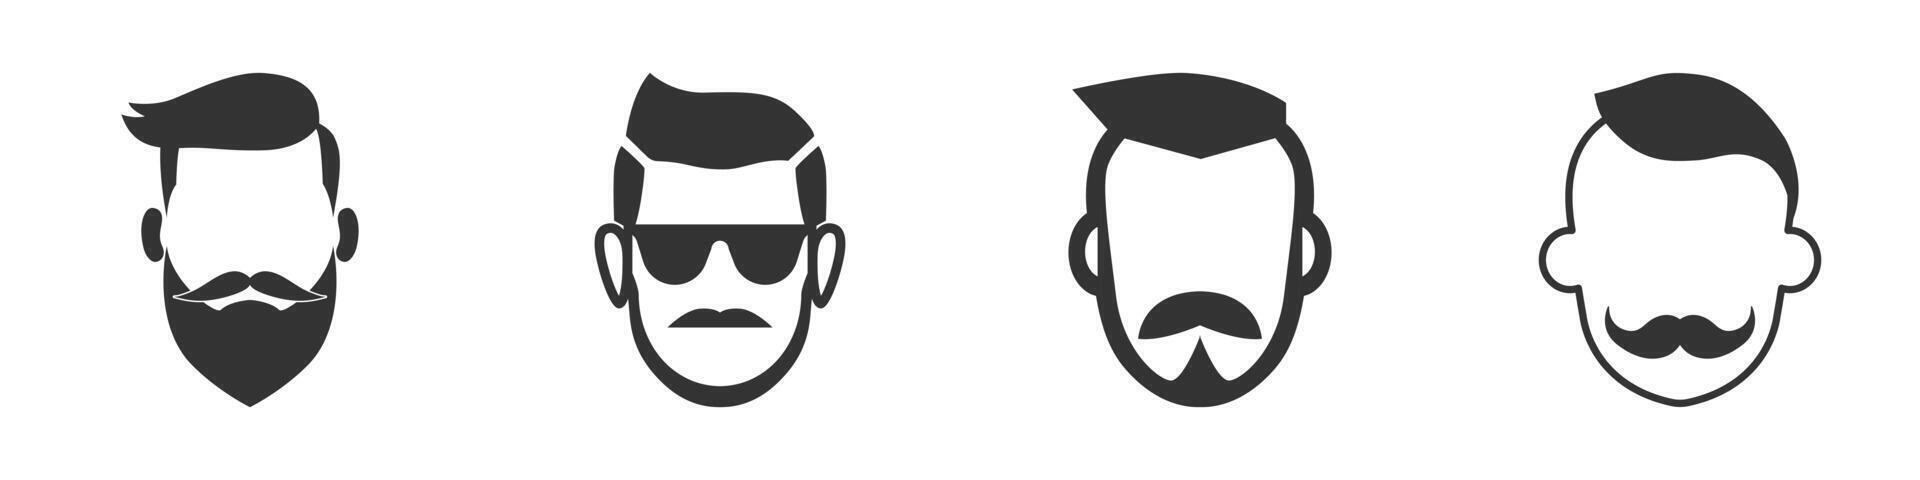 Silhouette of a man's head with a mustache. Vector illustration.